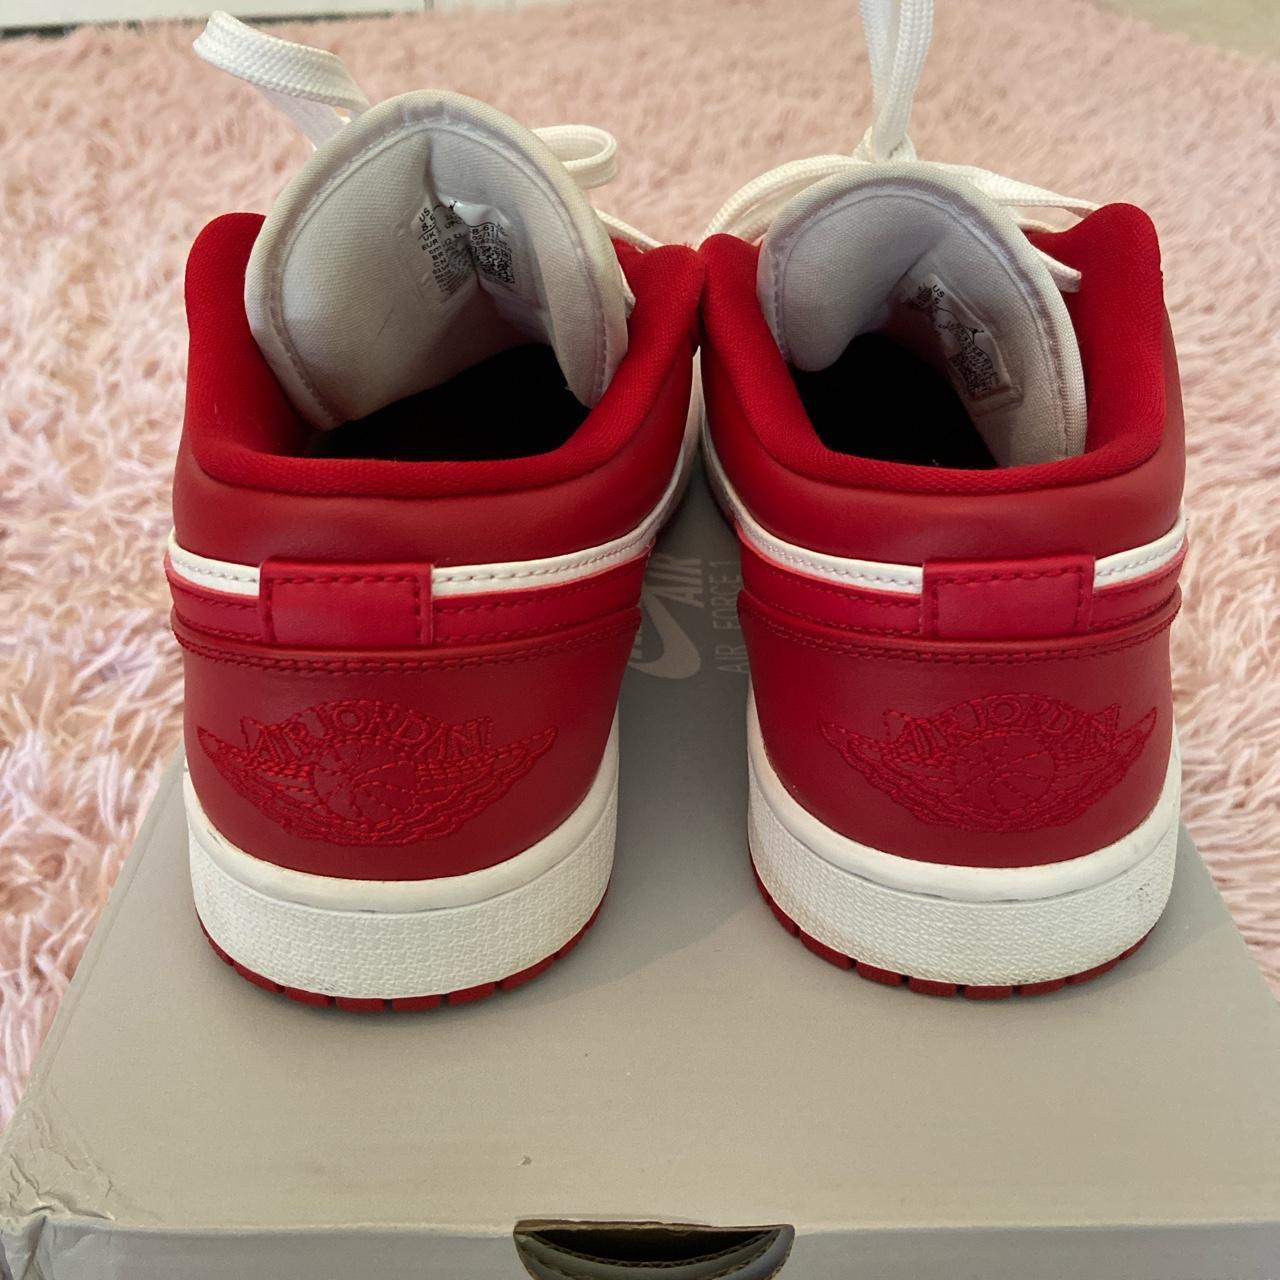 Jordan Men's Red and White Trainers | Depop